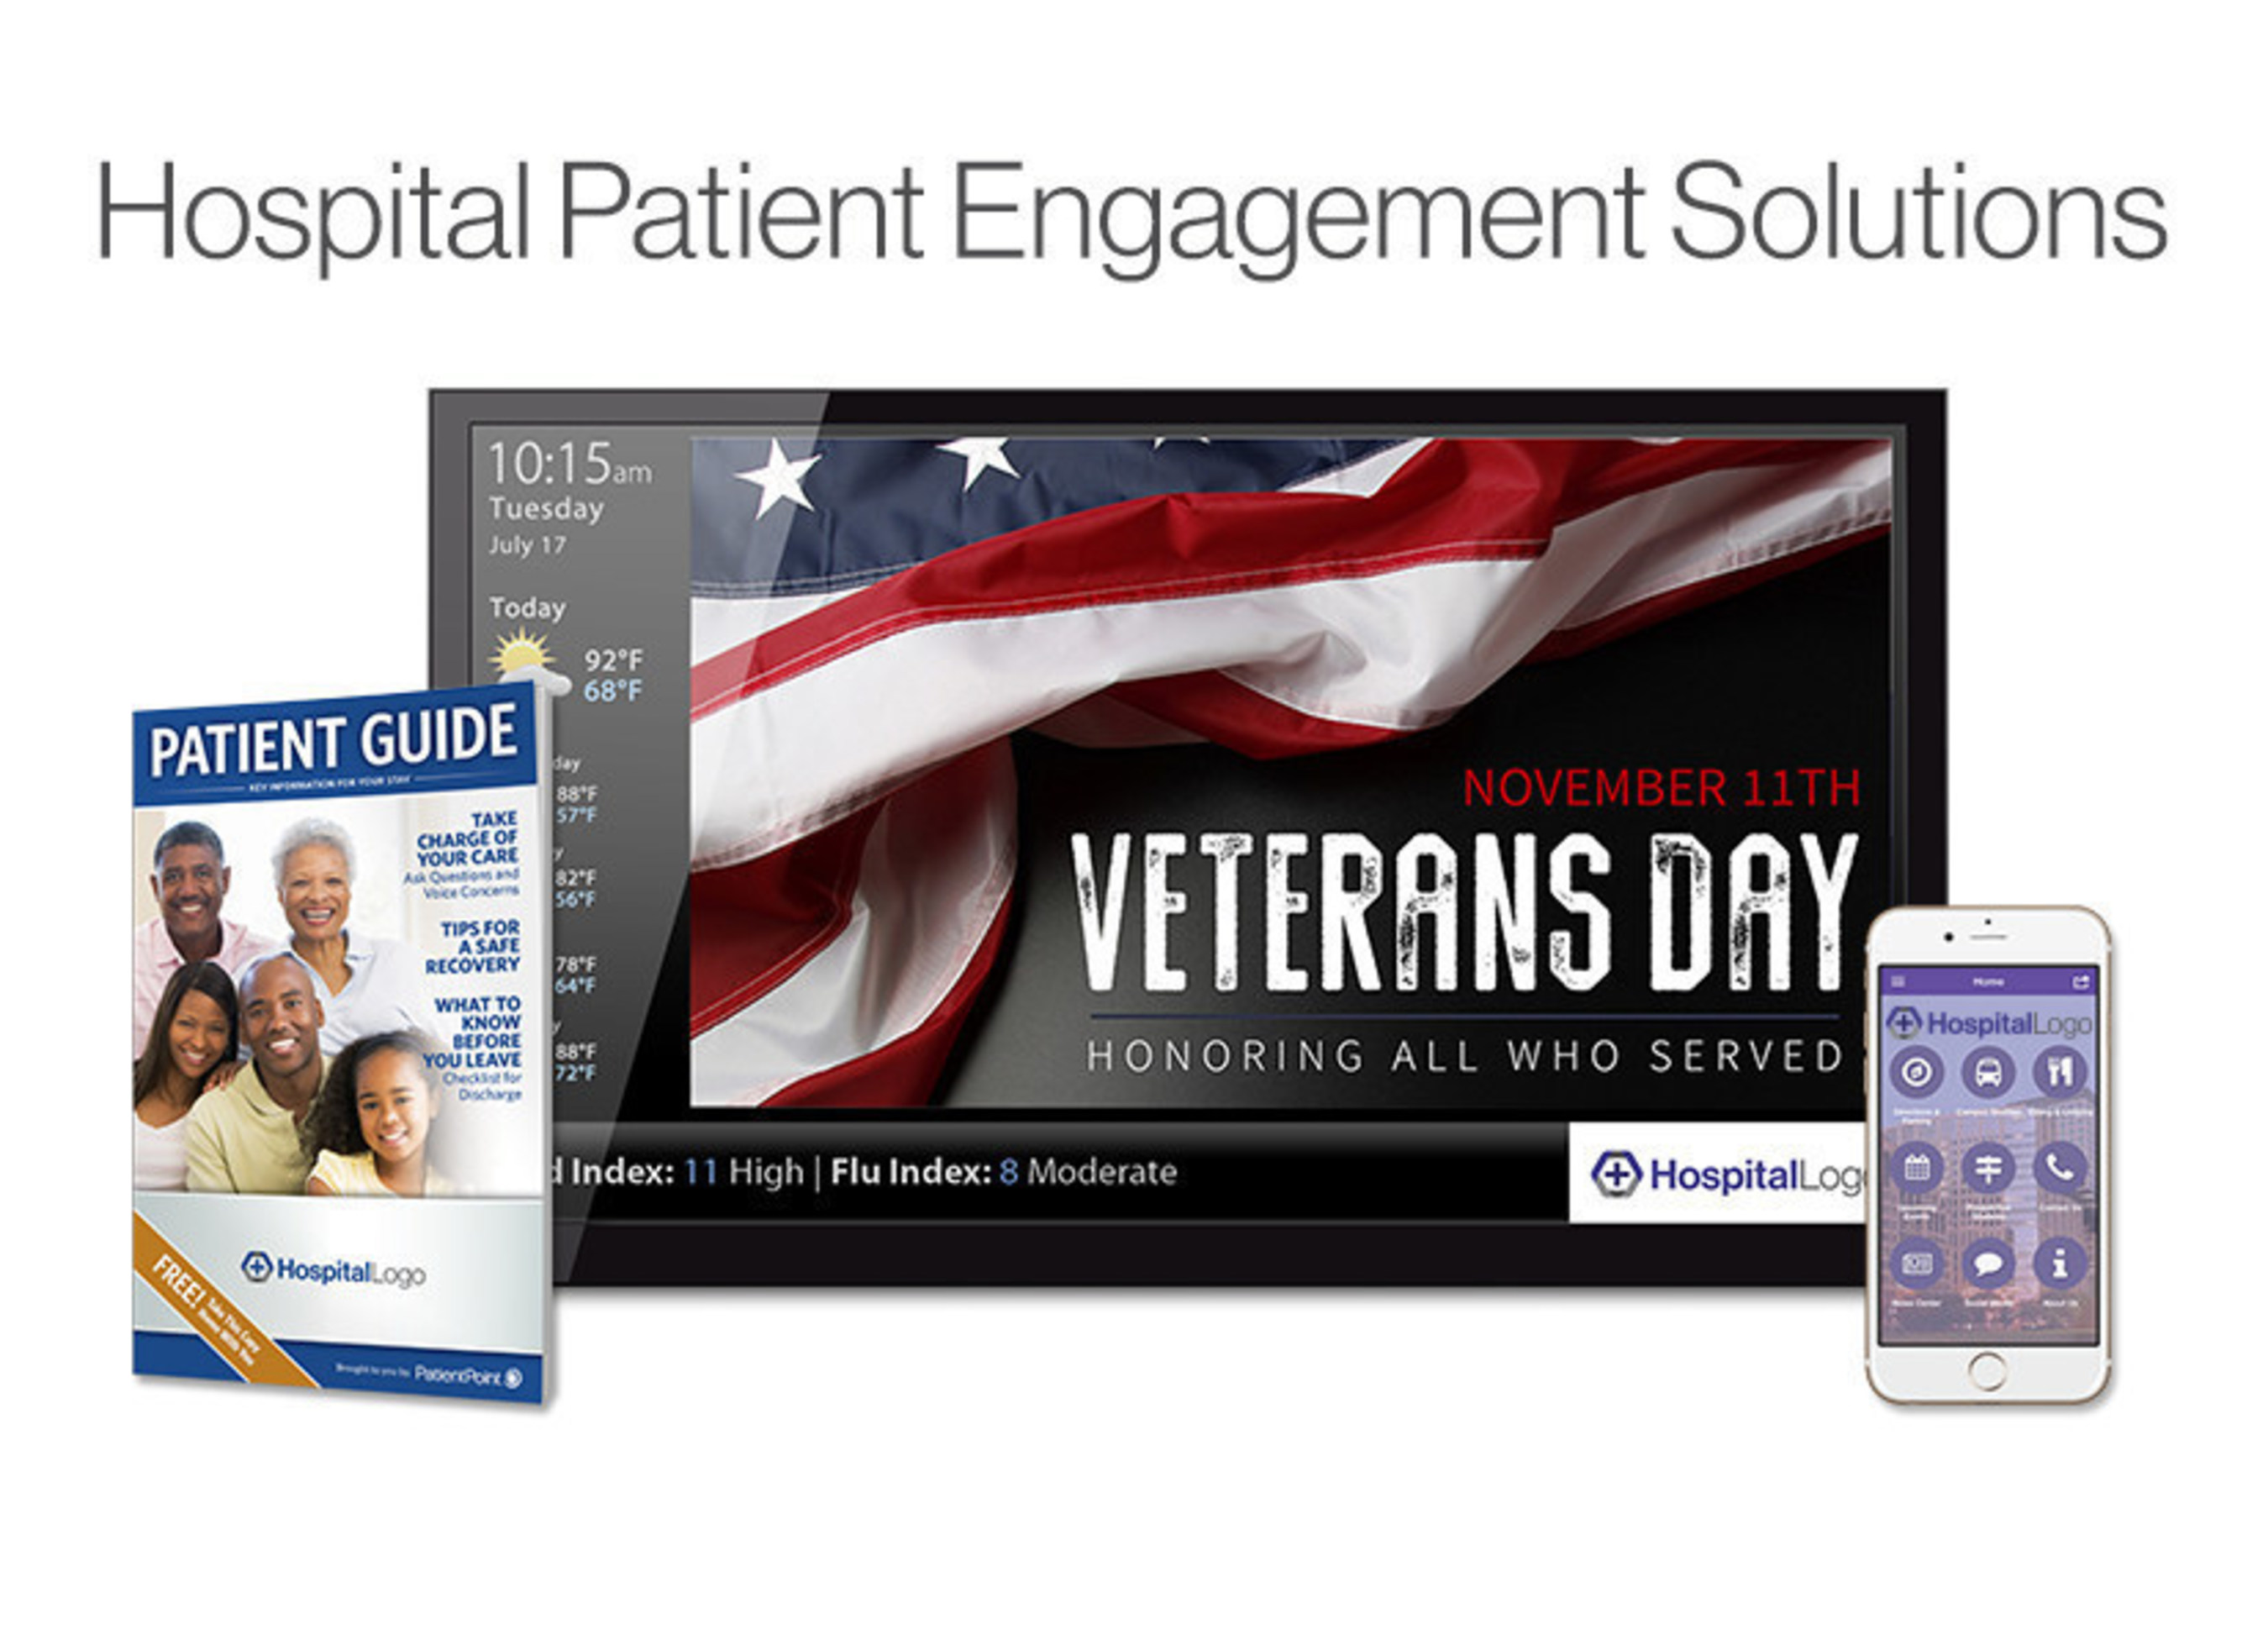 With its latest acquisition, PatientPoint expands its suite of print and digital solutions designed to help hospitals enhance the patient and physician experience through communication and education.